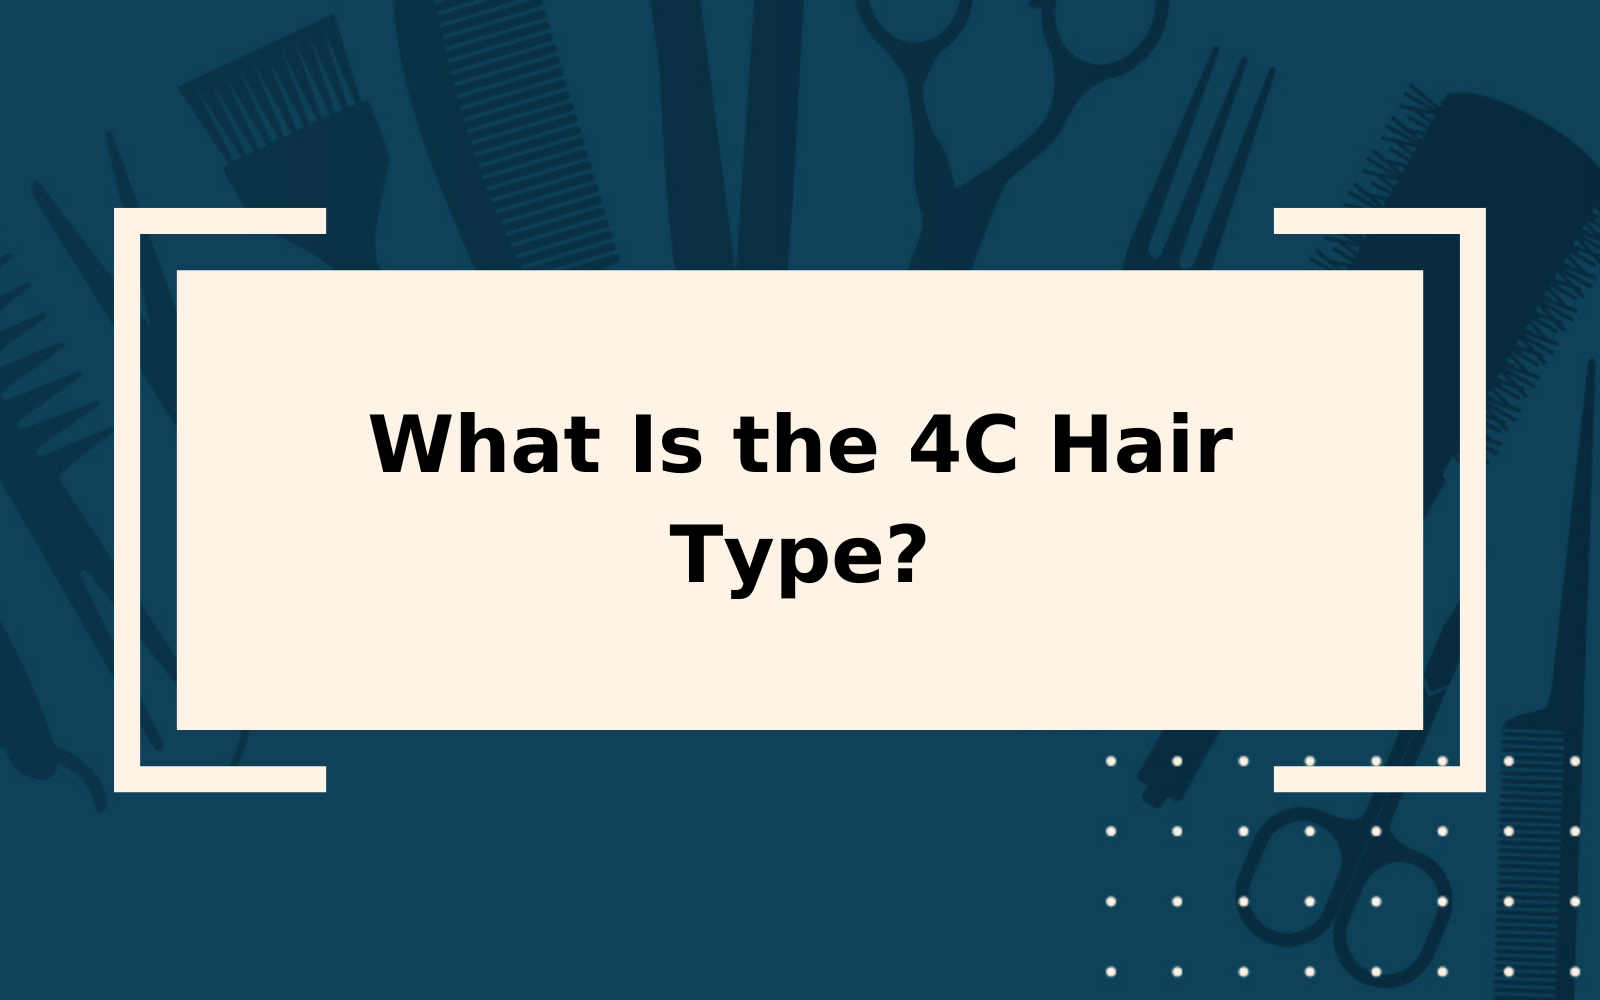 The 4C Hair Type | Quick Reference Guide & Care Tips